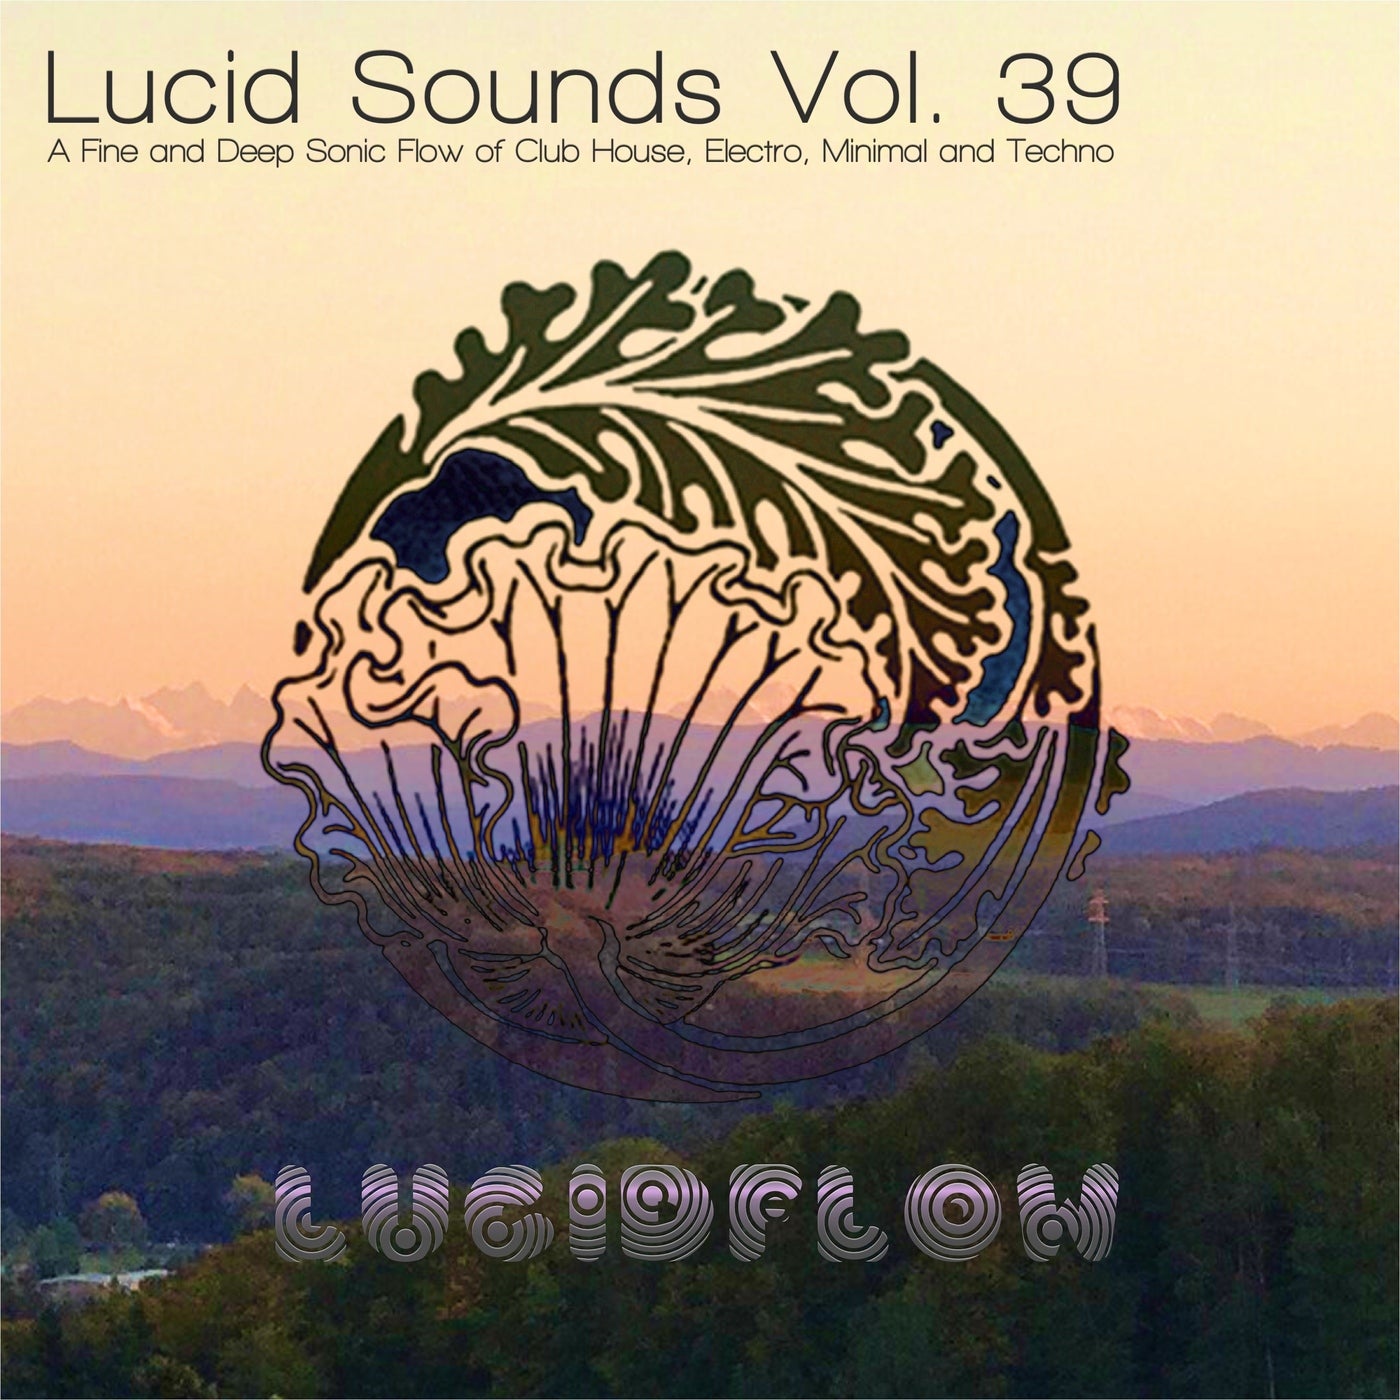 Lucid Sounds, Vol. 39 (A Fine and Deep Sonic Flow of Club House, Electro, Minimal and Techno)